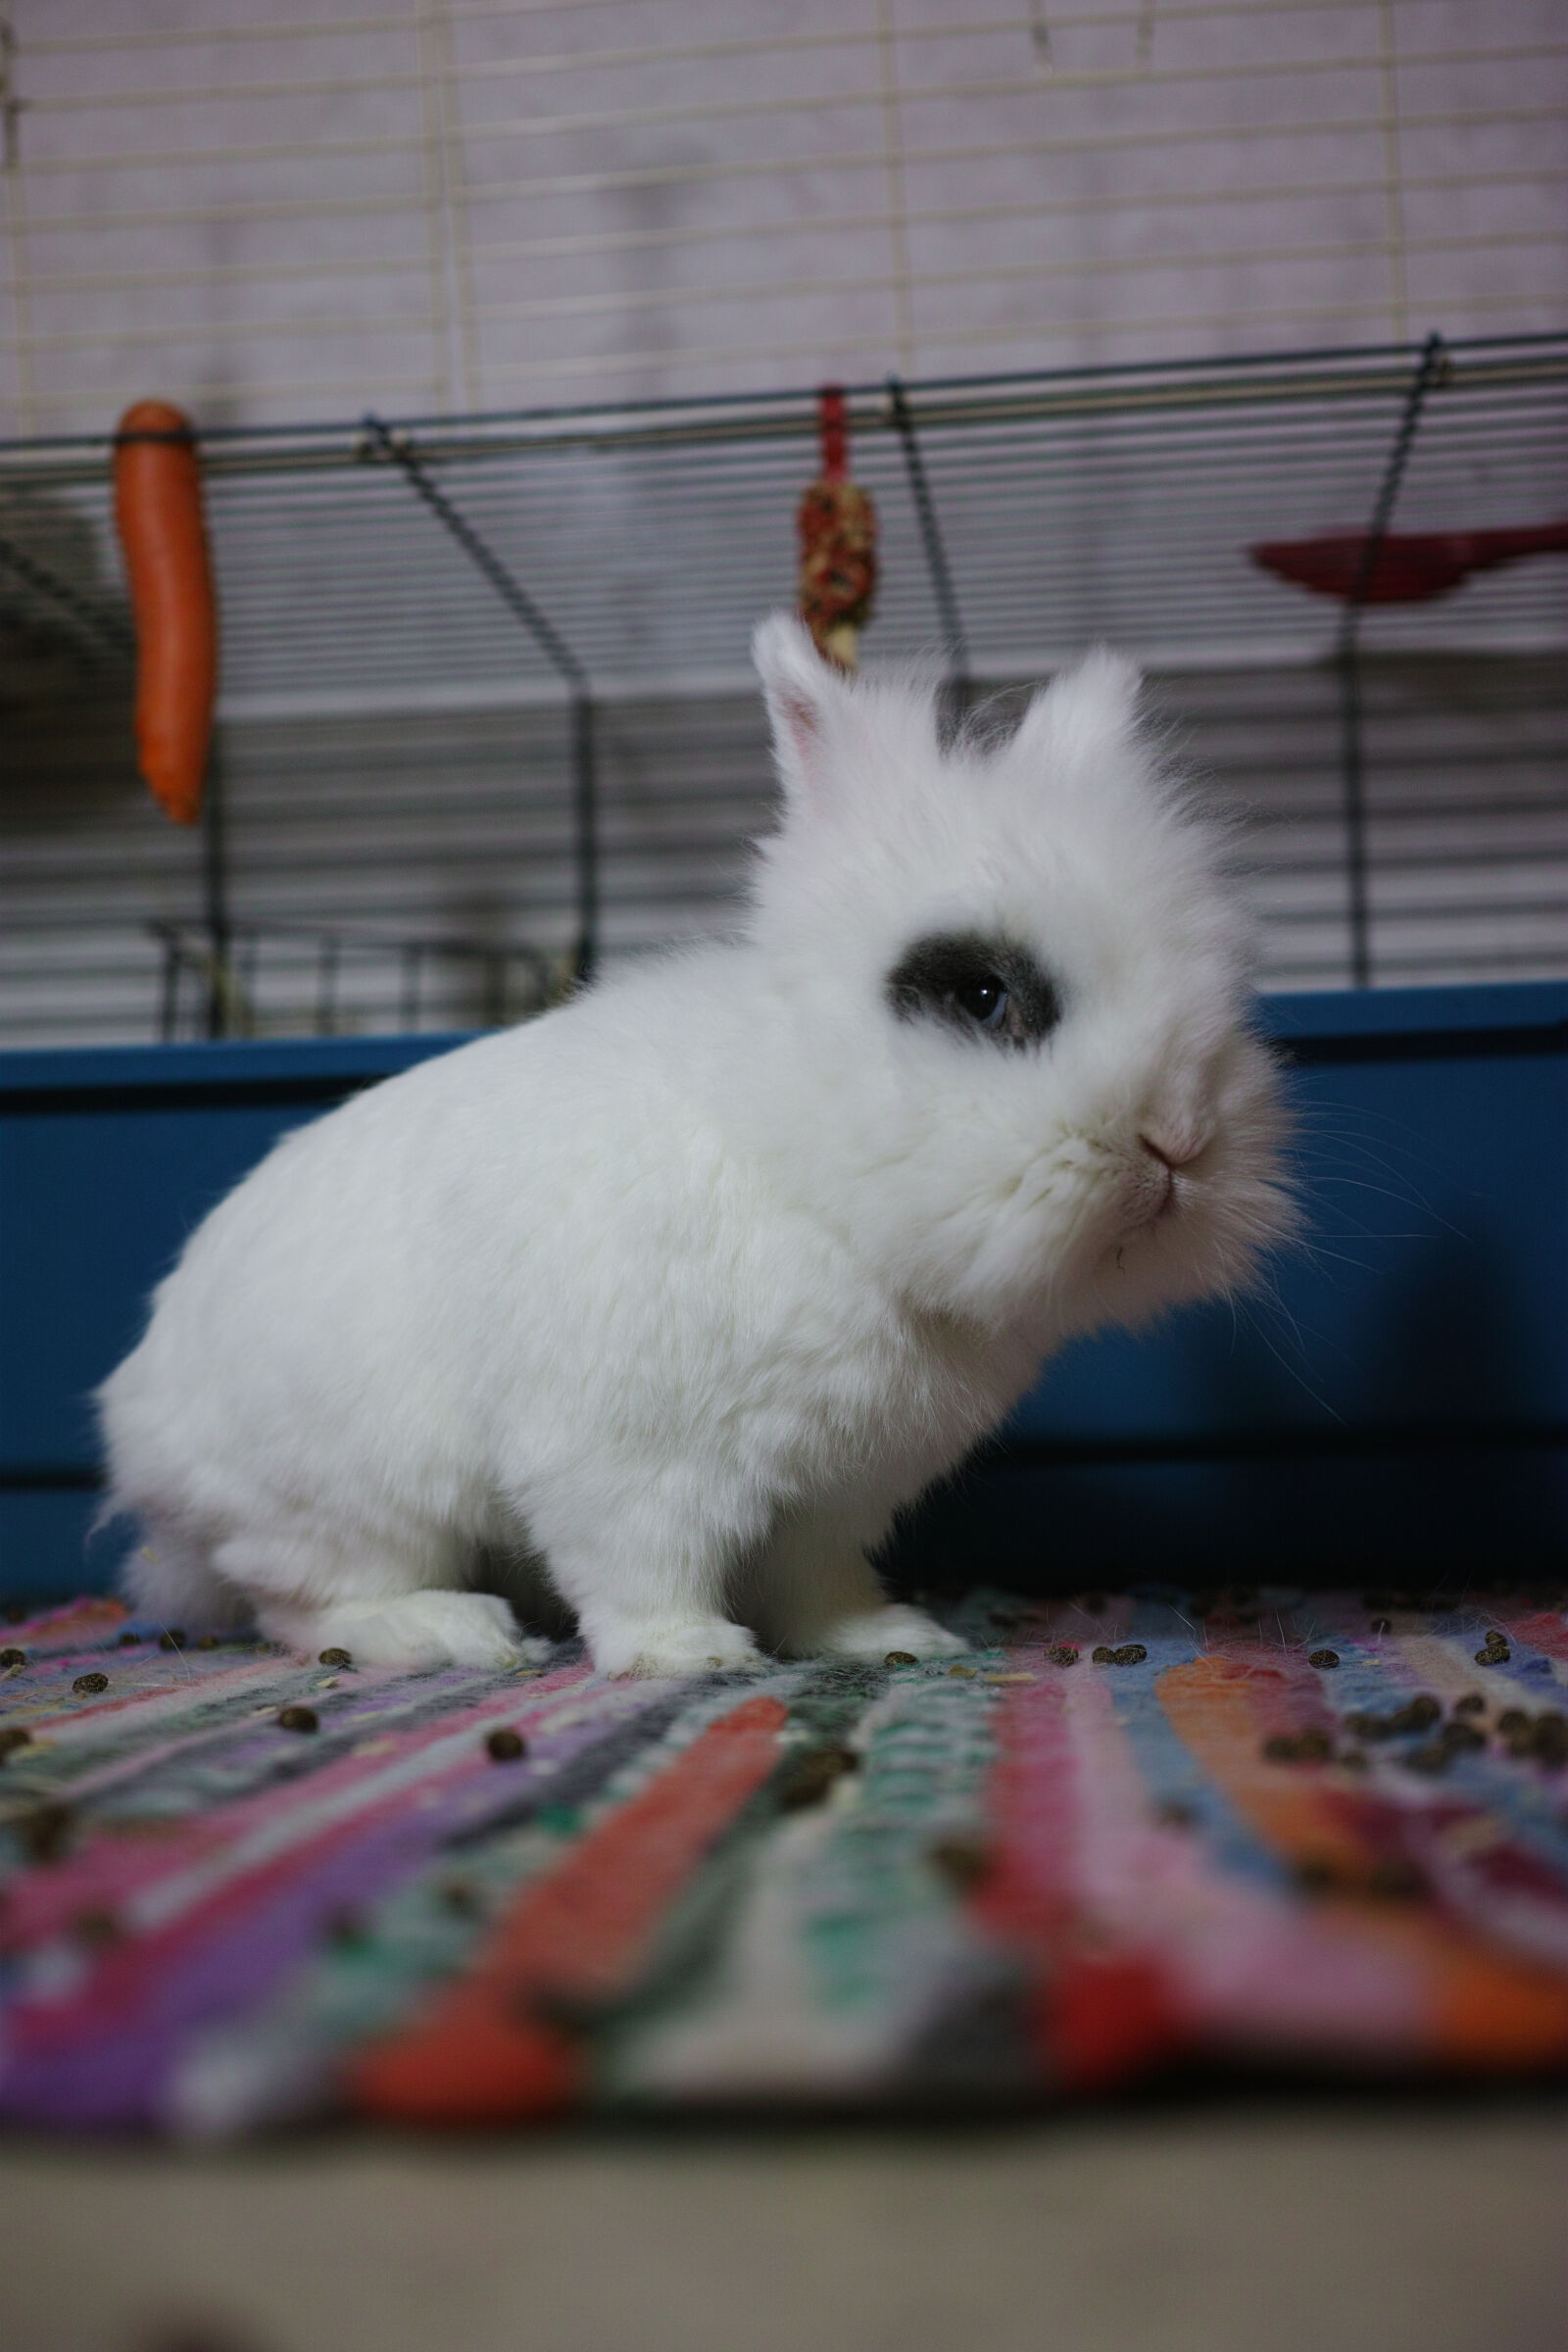 Sigma dp2 Quattro sample photo. Disapproving bunny analog photography